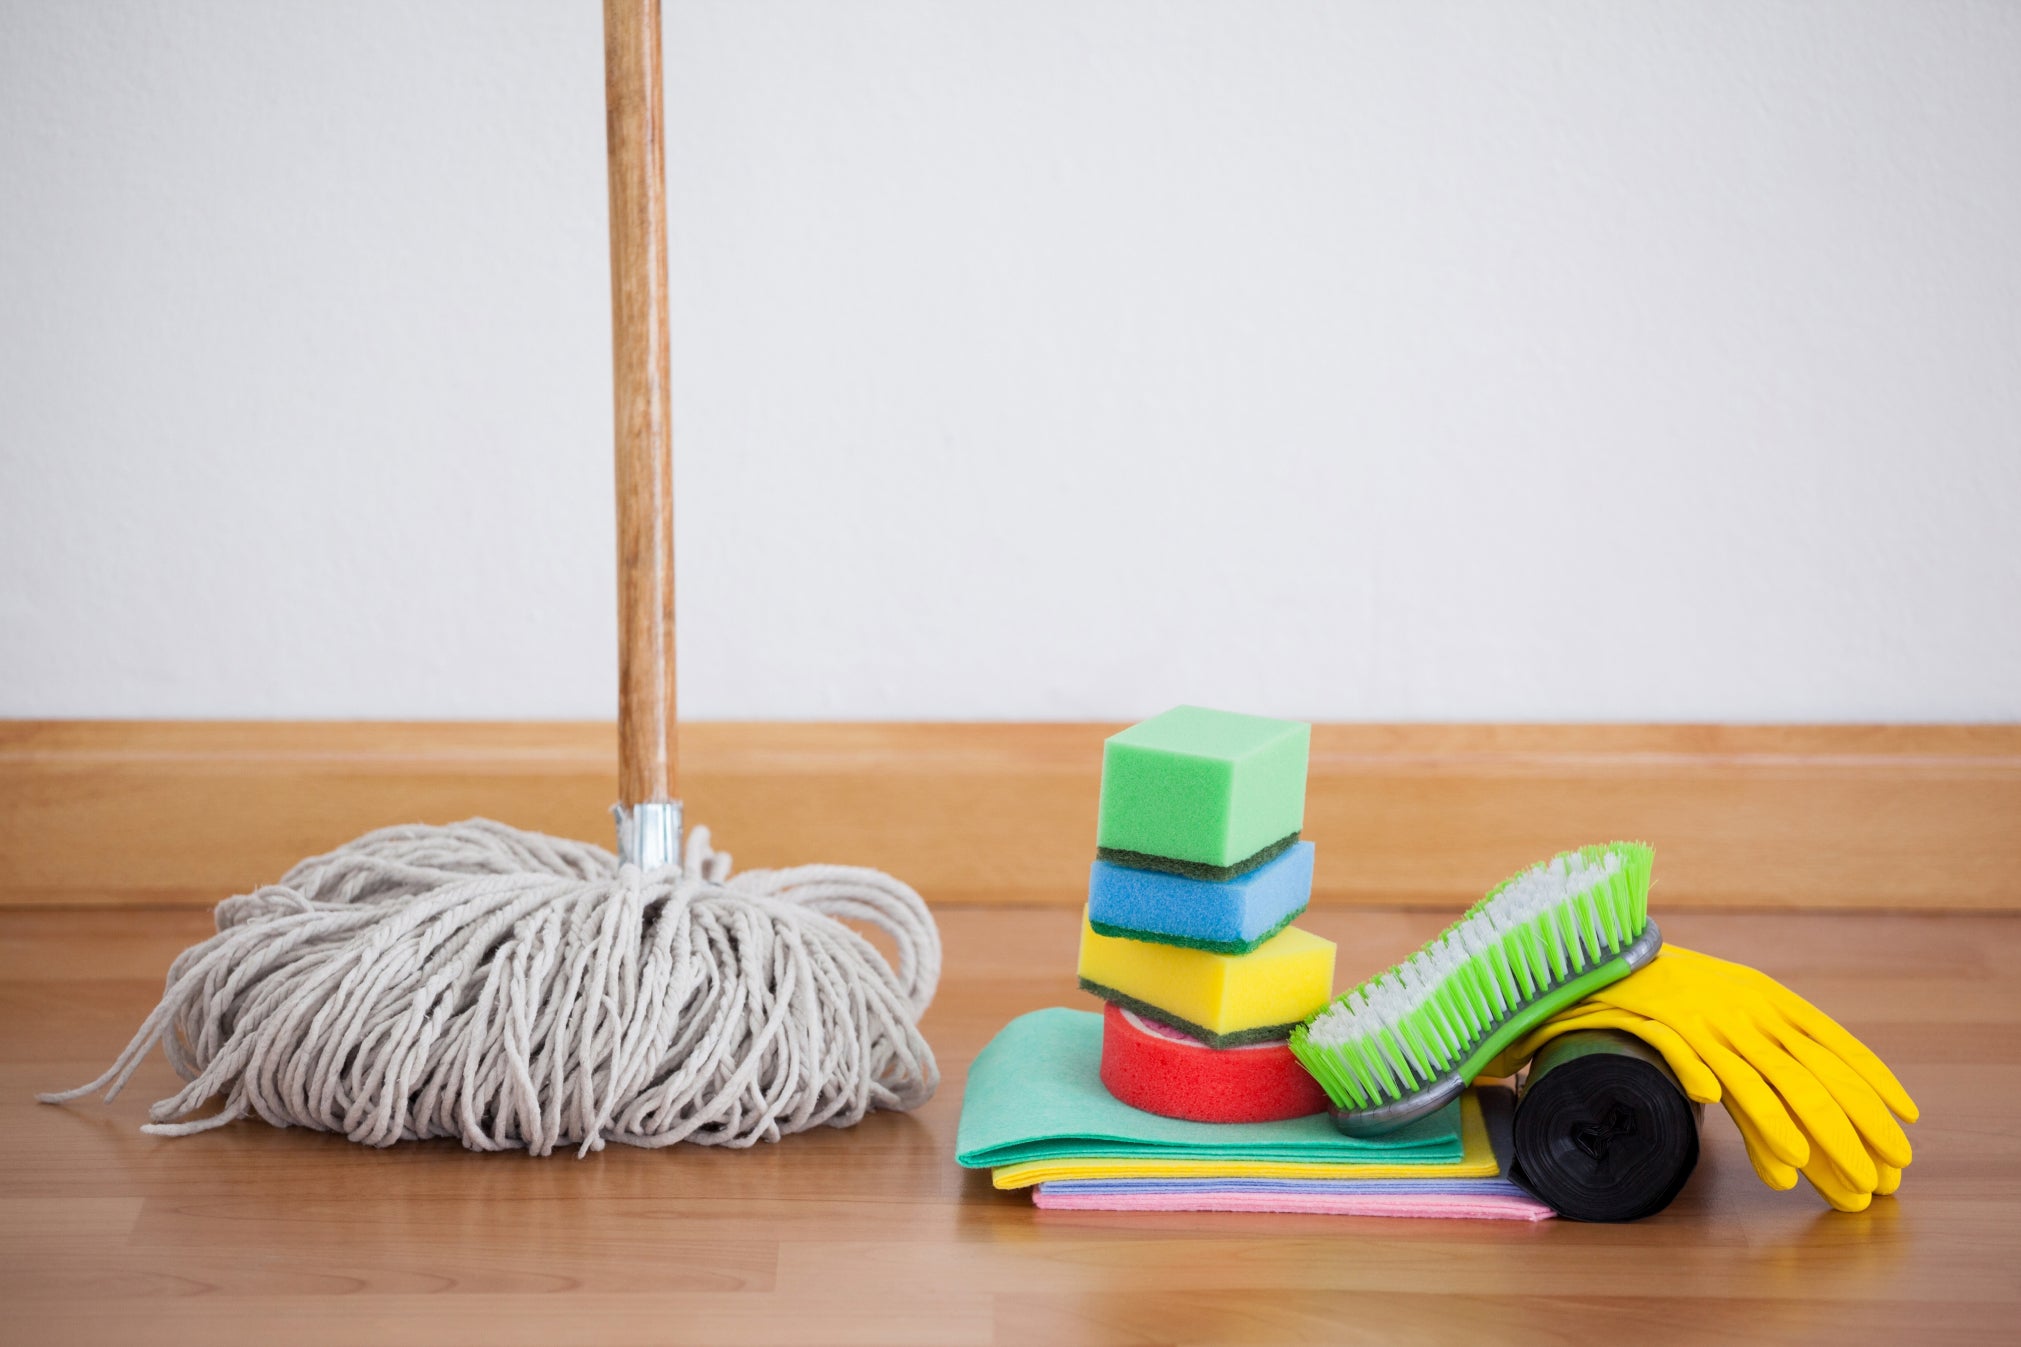 Mop and cleaning tools on wooden floor